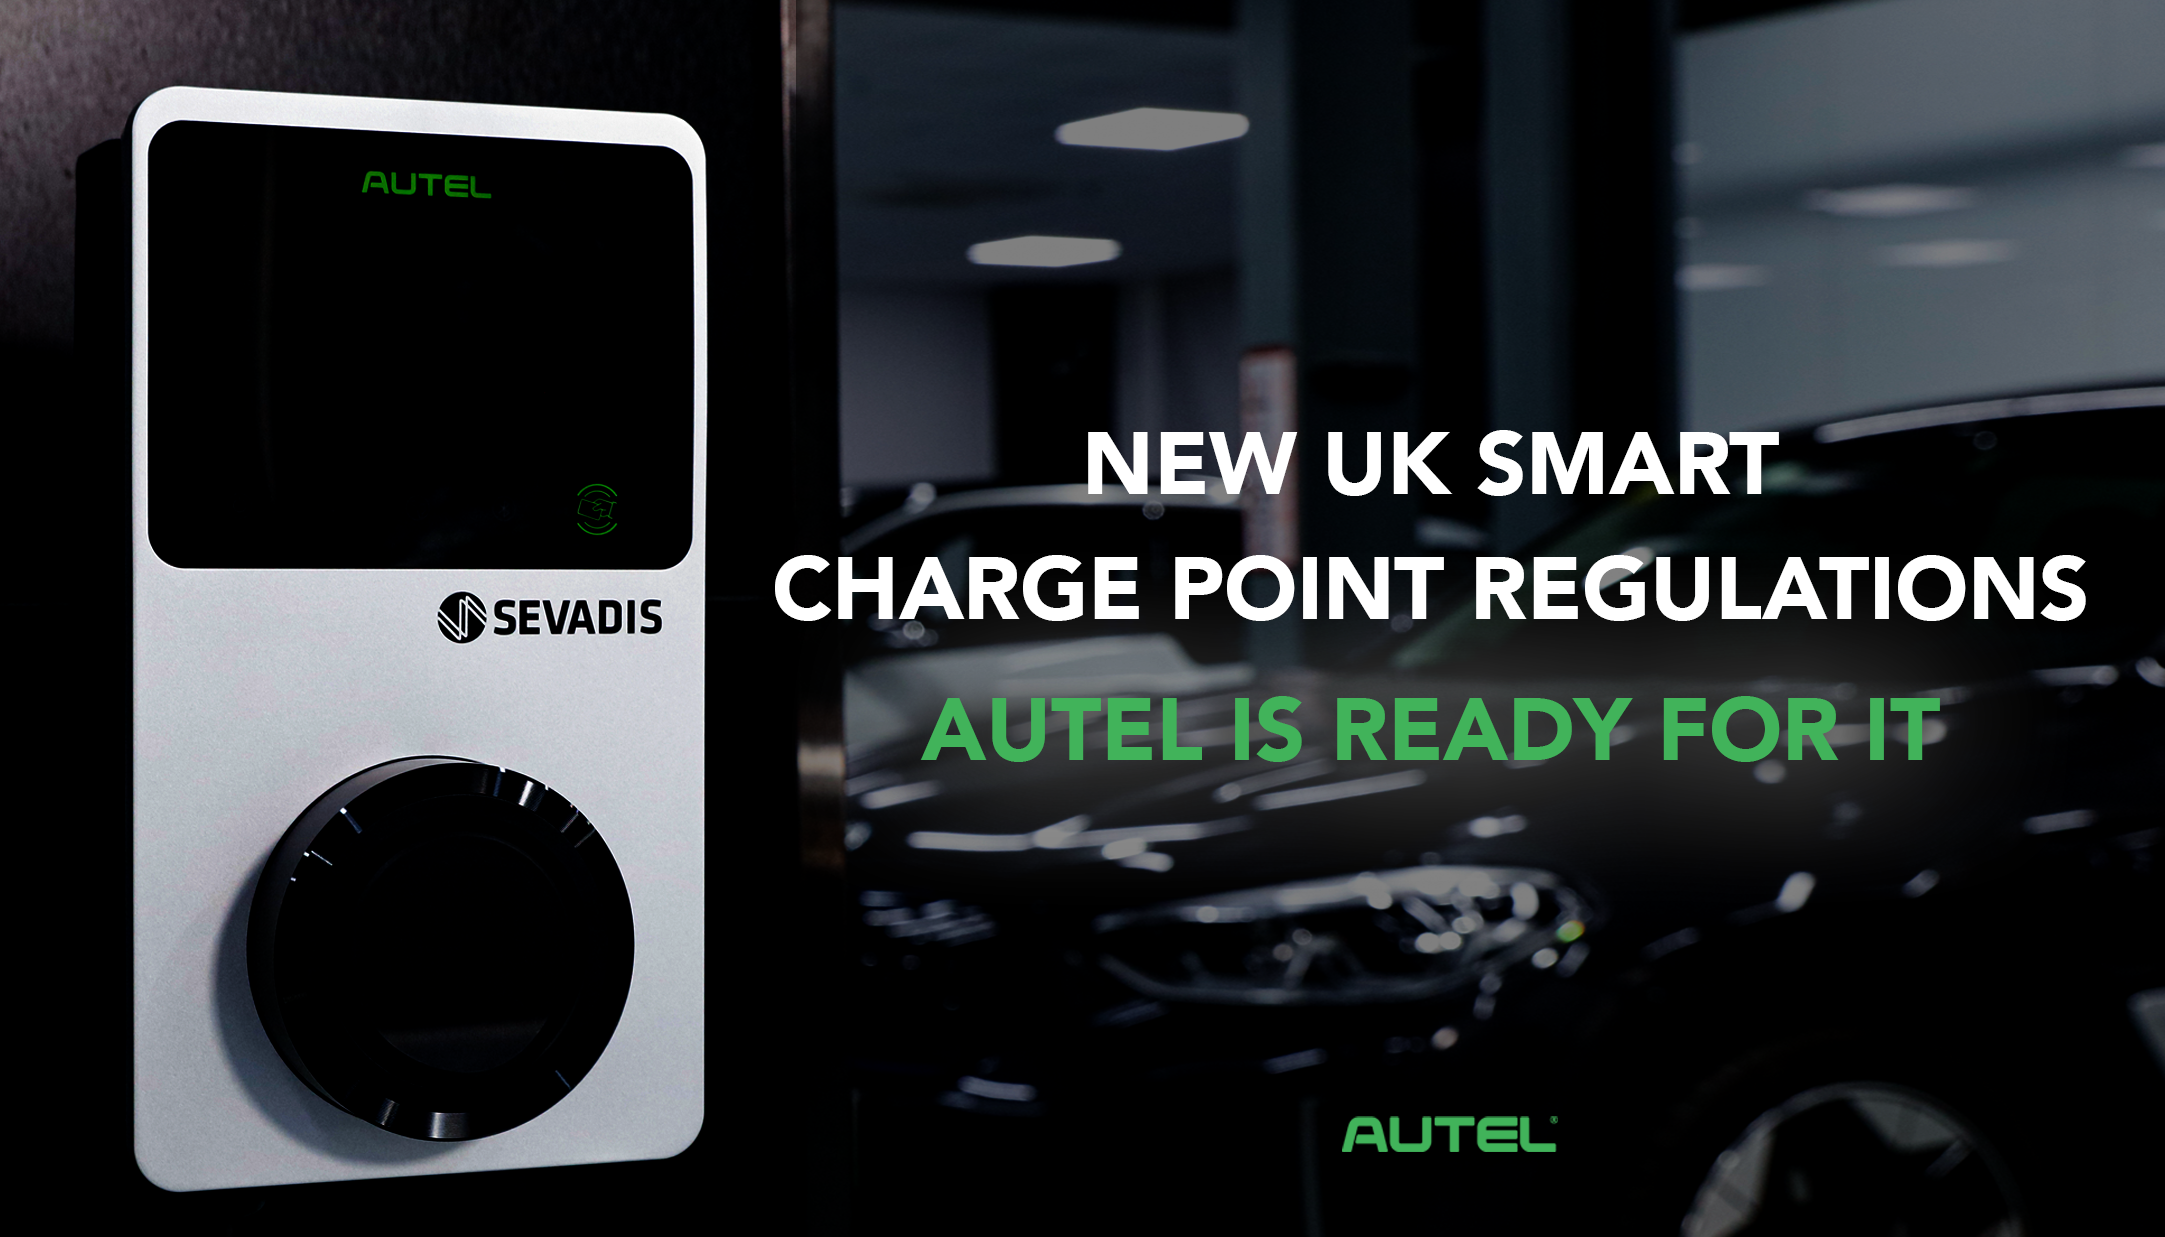 All home EV chargepoints will need smart chargers in the UK